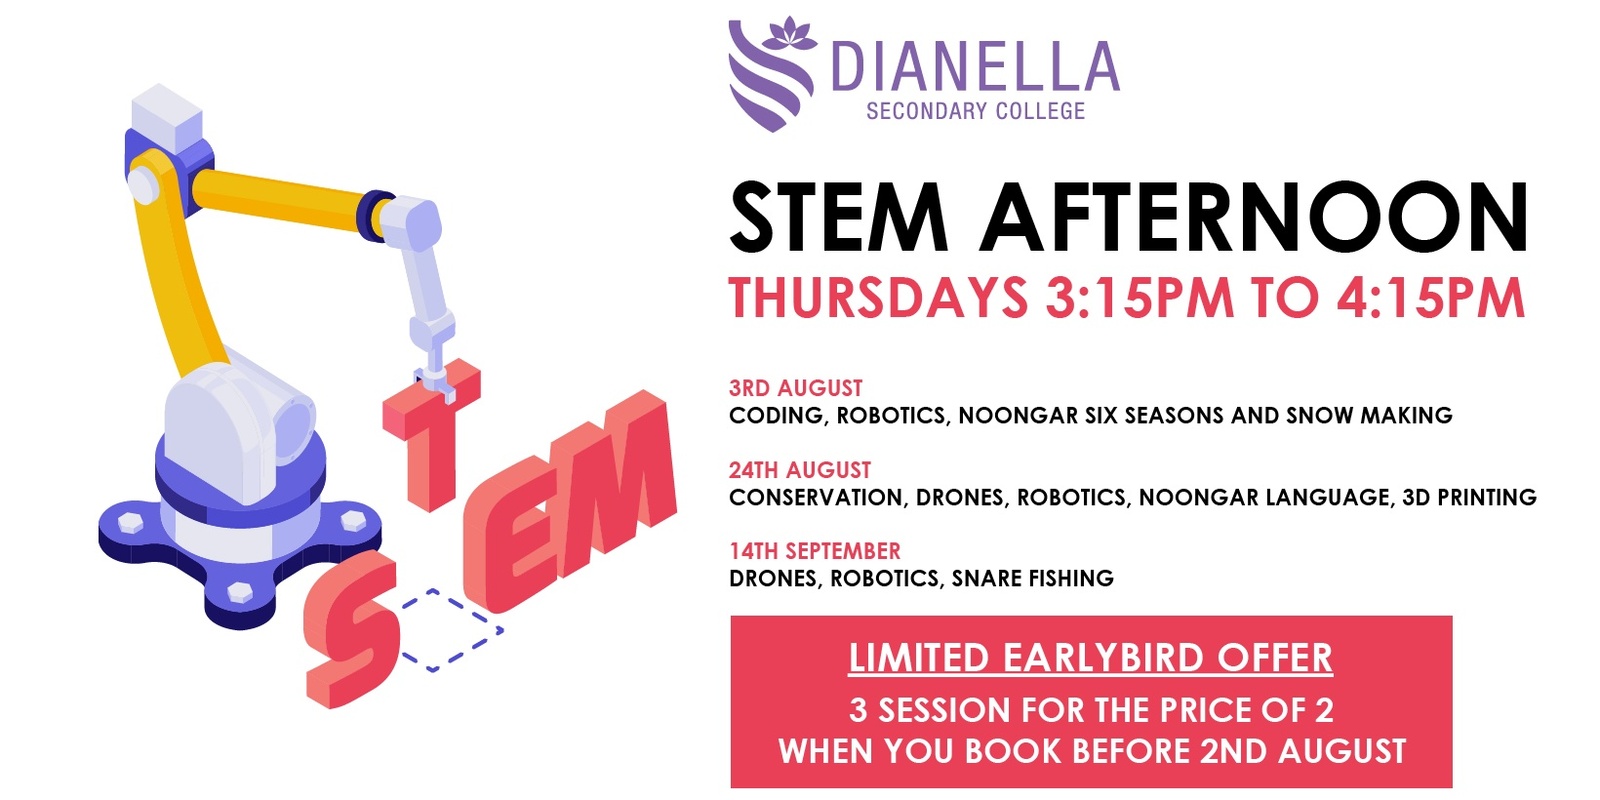 Banner image for Dianella Secondary College STEM Afternoon